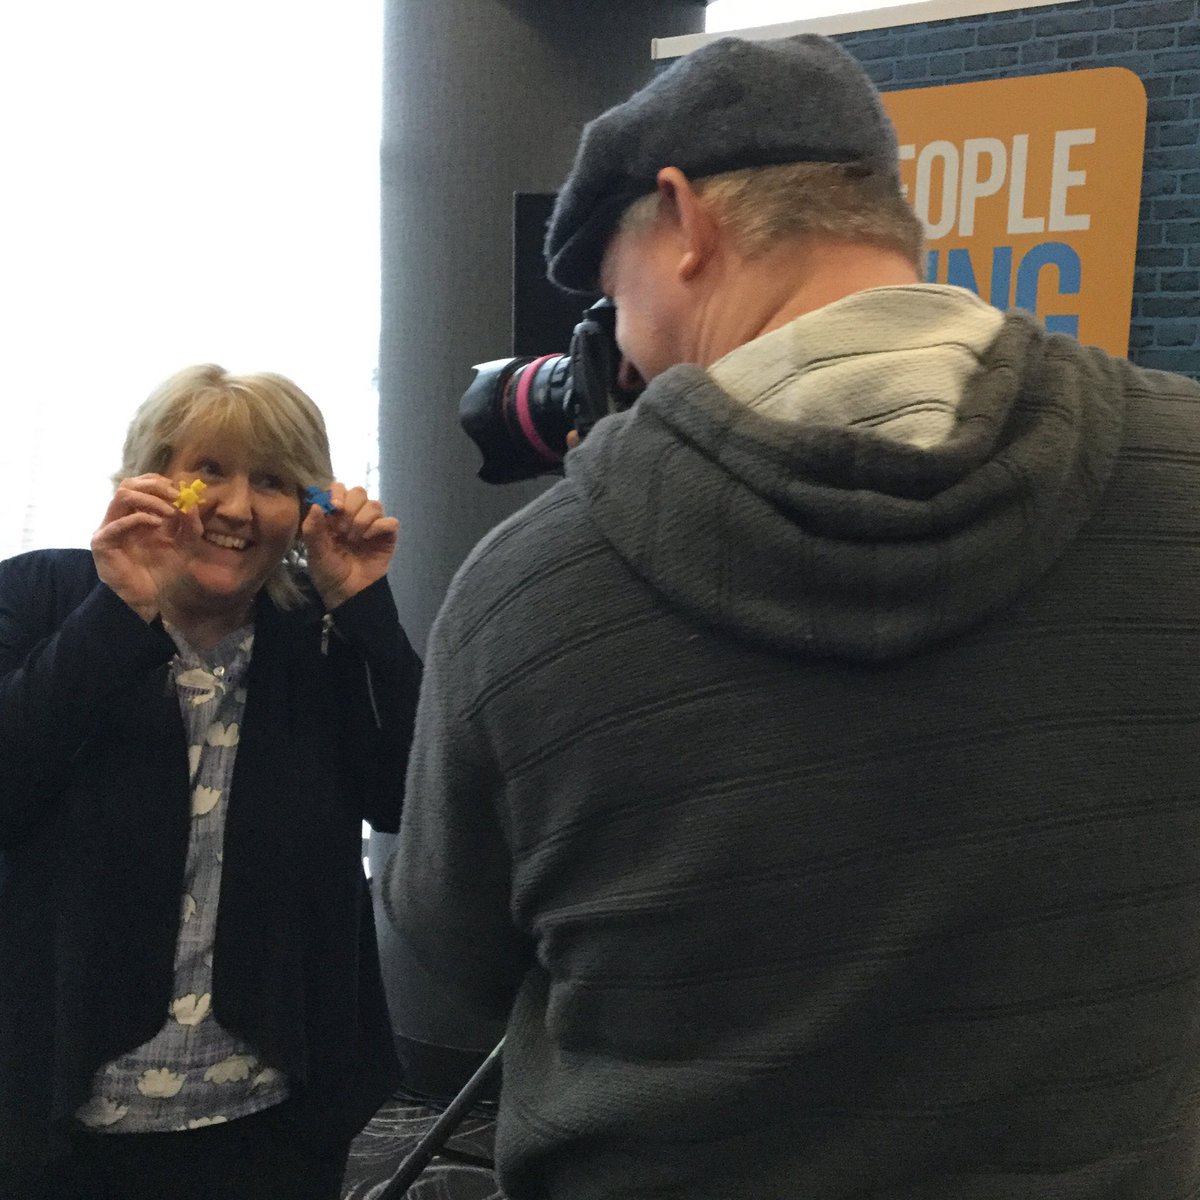 Thanks to @Johnsteelphoto for capturing the excitement of the event today at #KirkleesConf We can’t wait to see the official photos 📸  #EventPartner